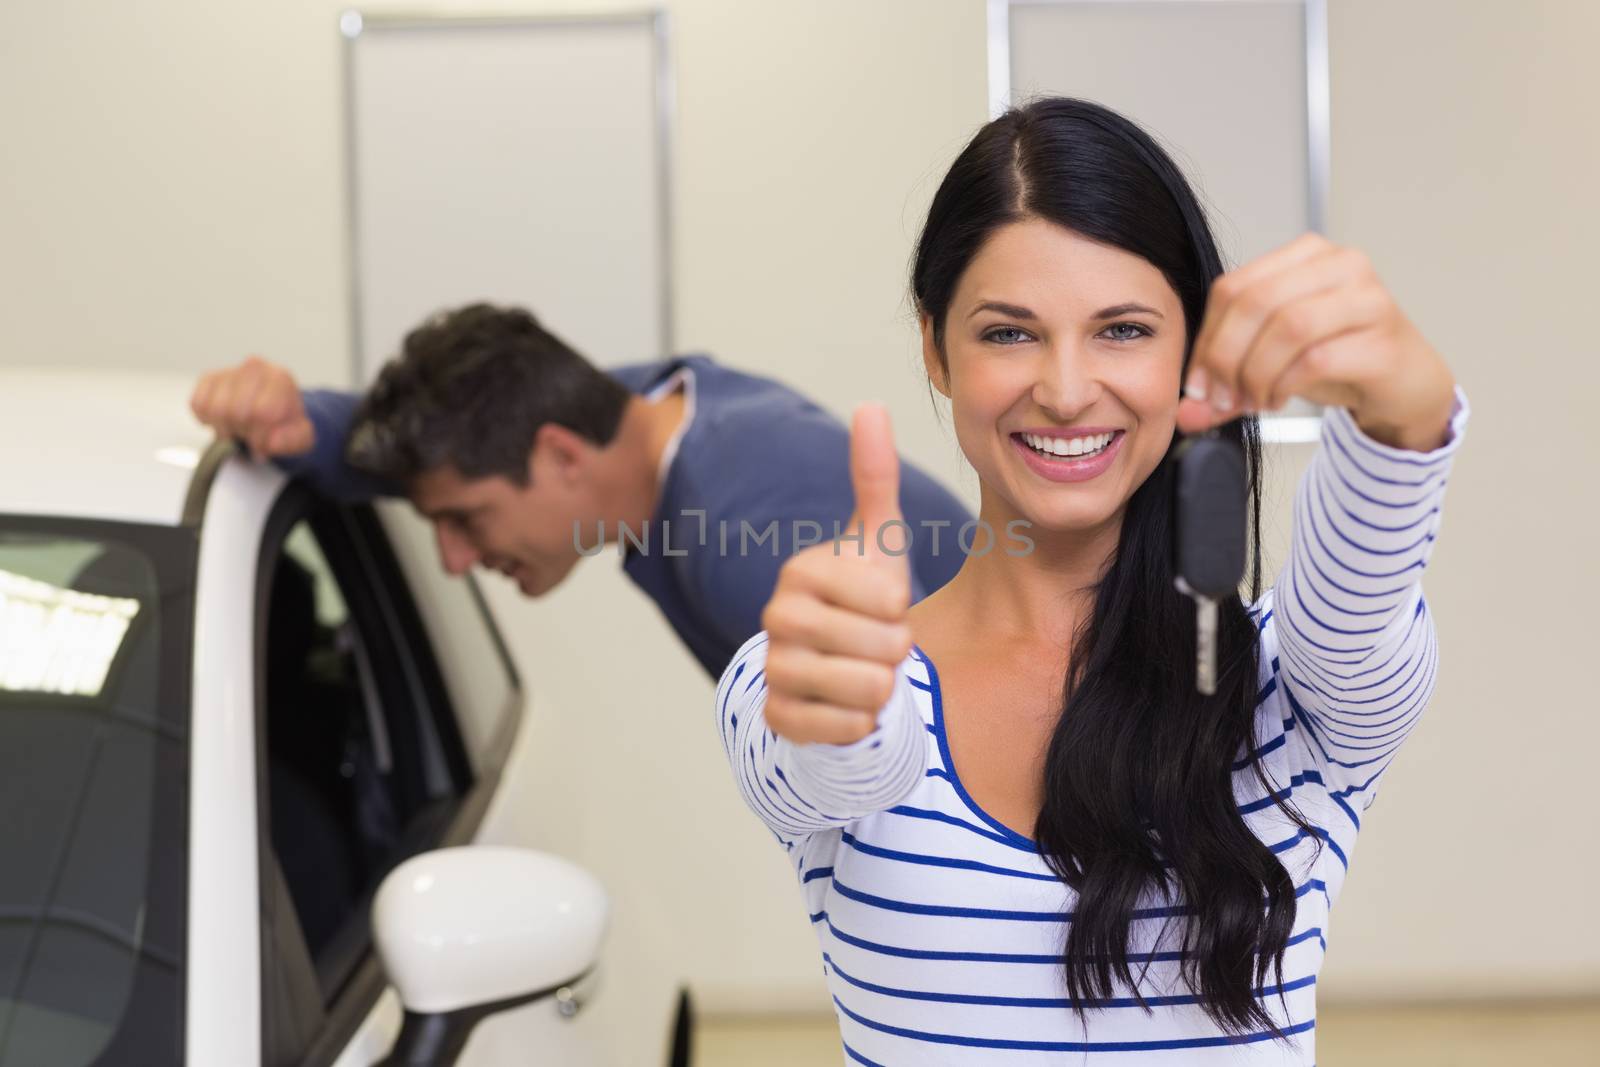 Customer holding her new car key while giving thumbs up by Wavebreakmedia